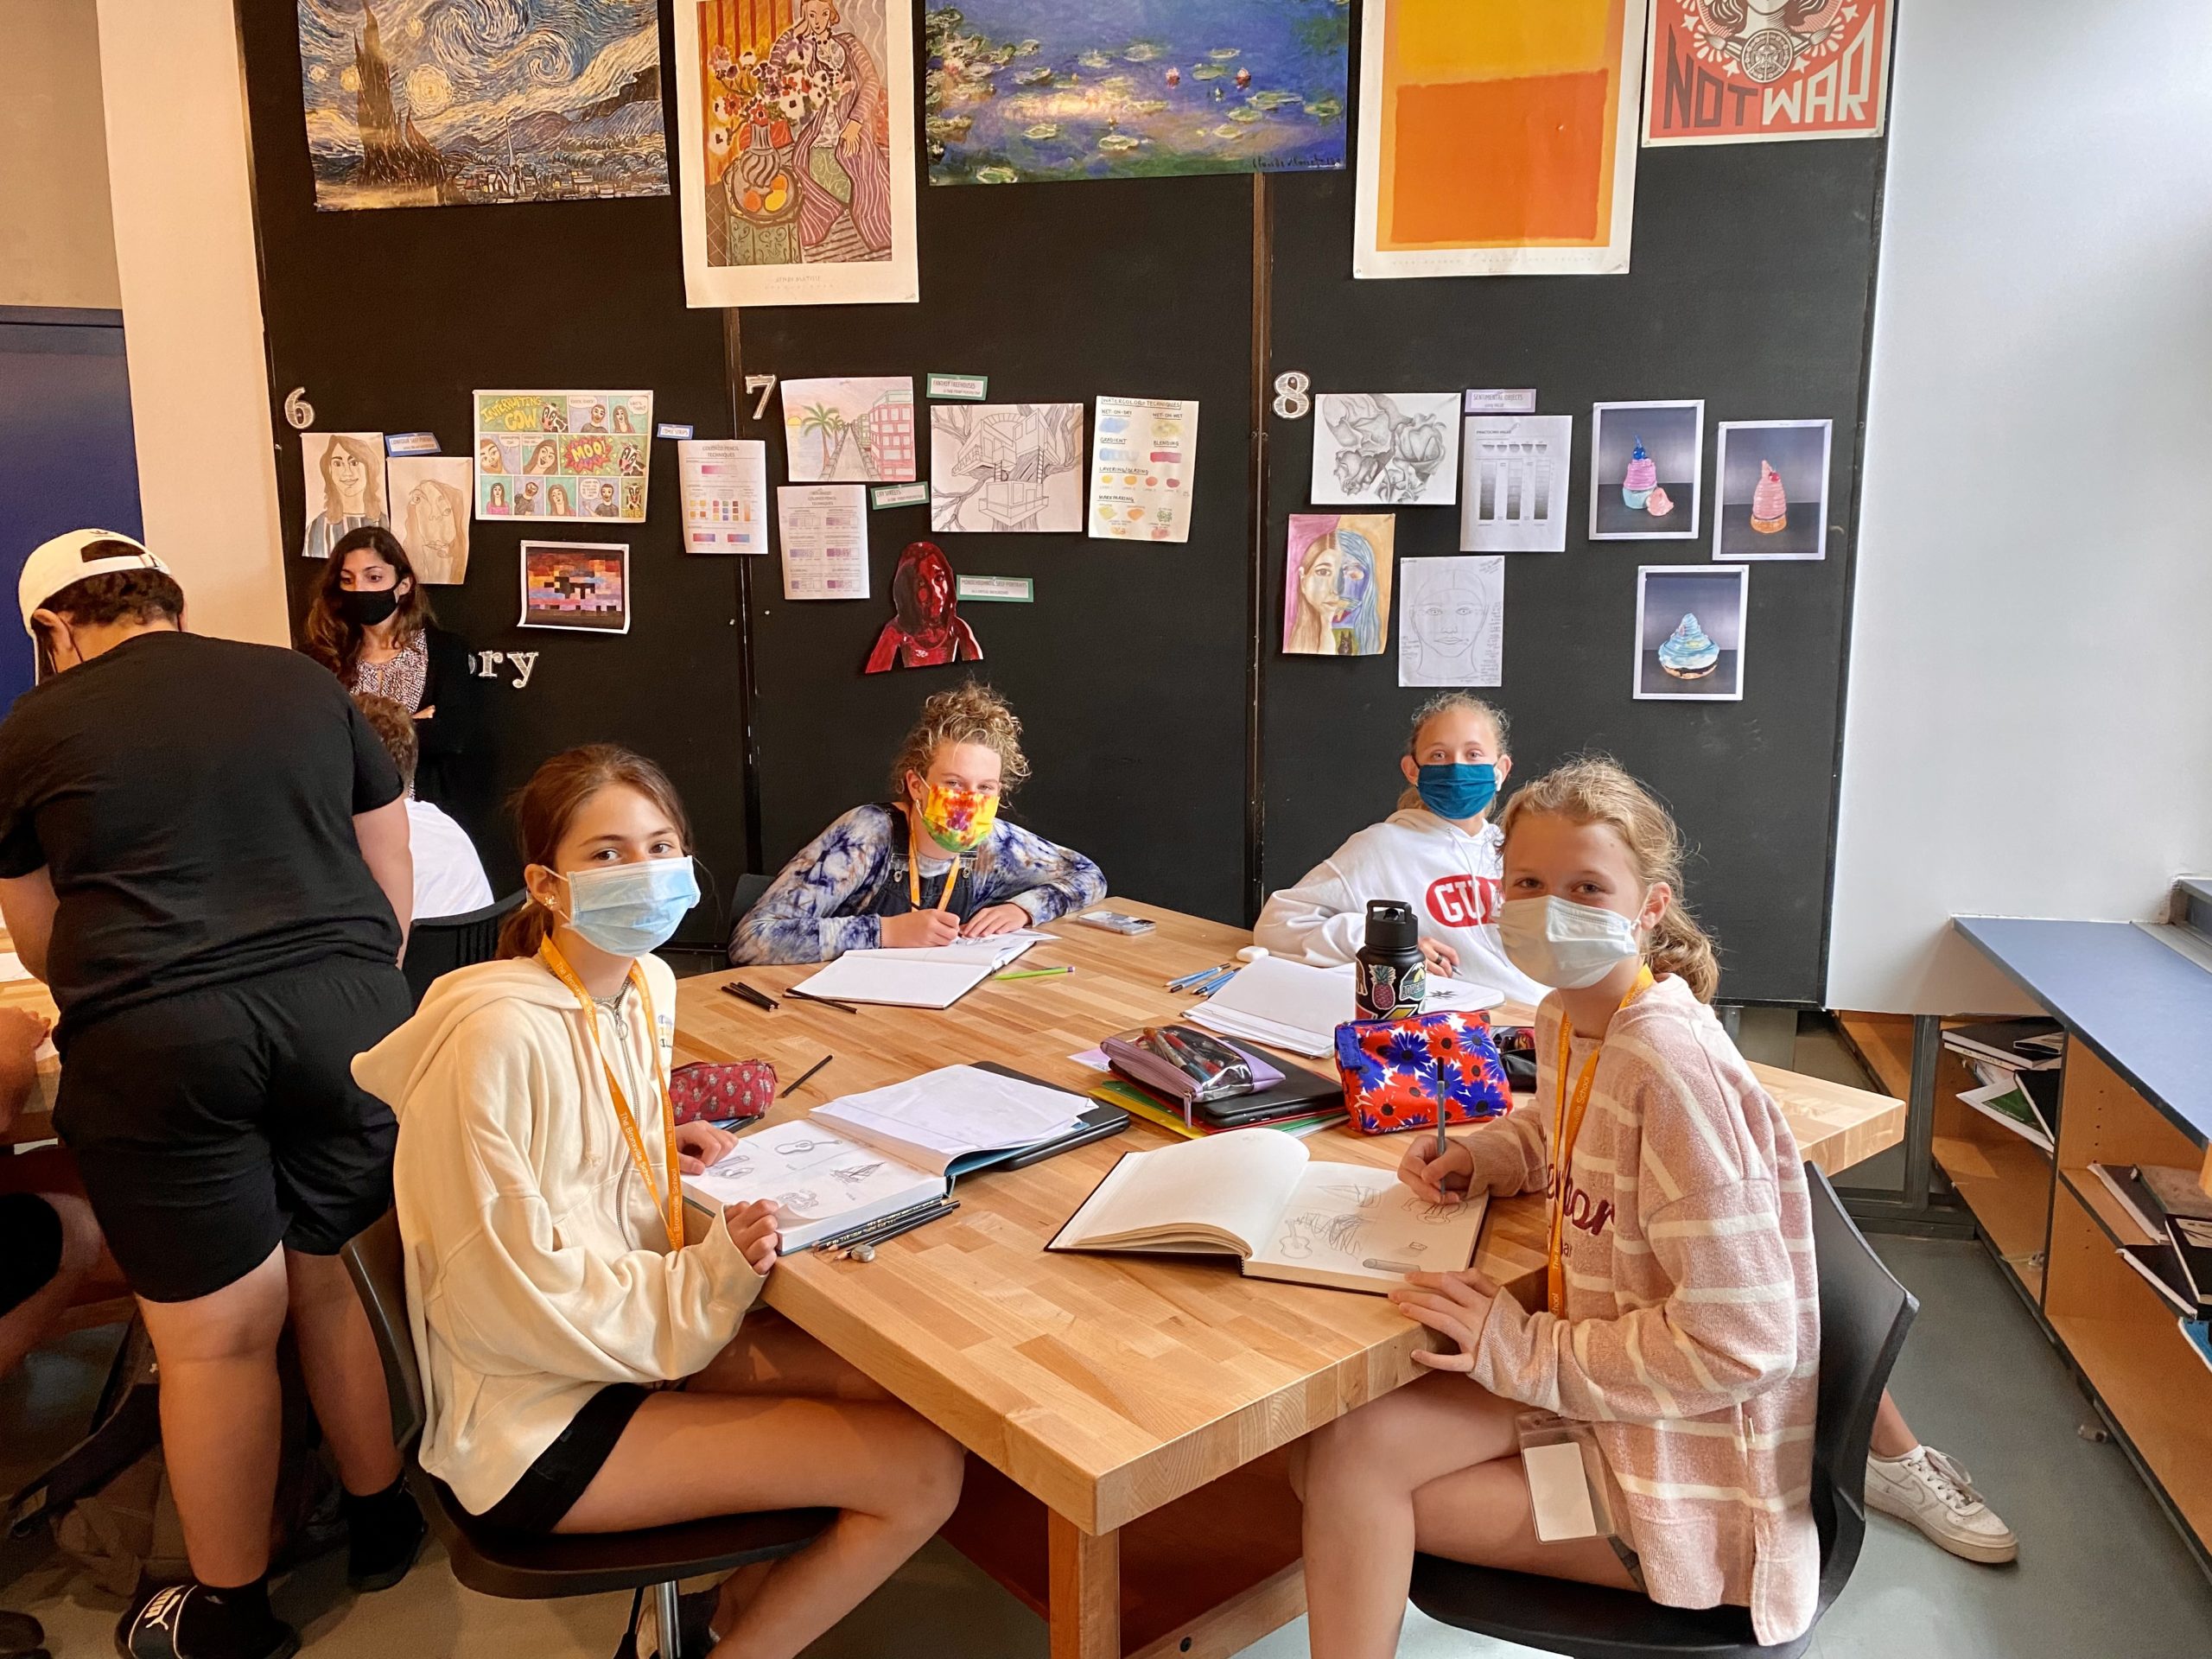 Eighth Graders Sketch Objects in Newly Renovated Classroom